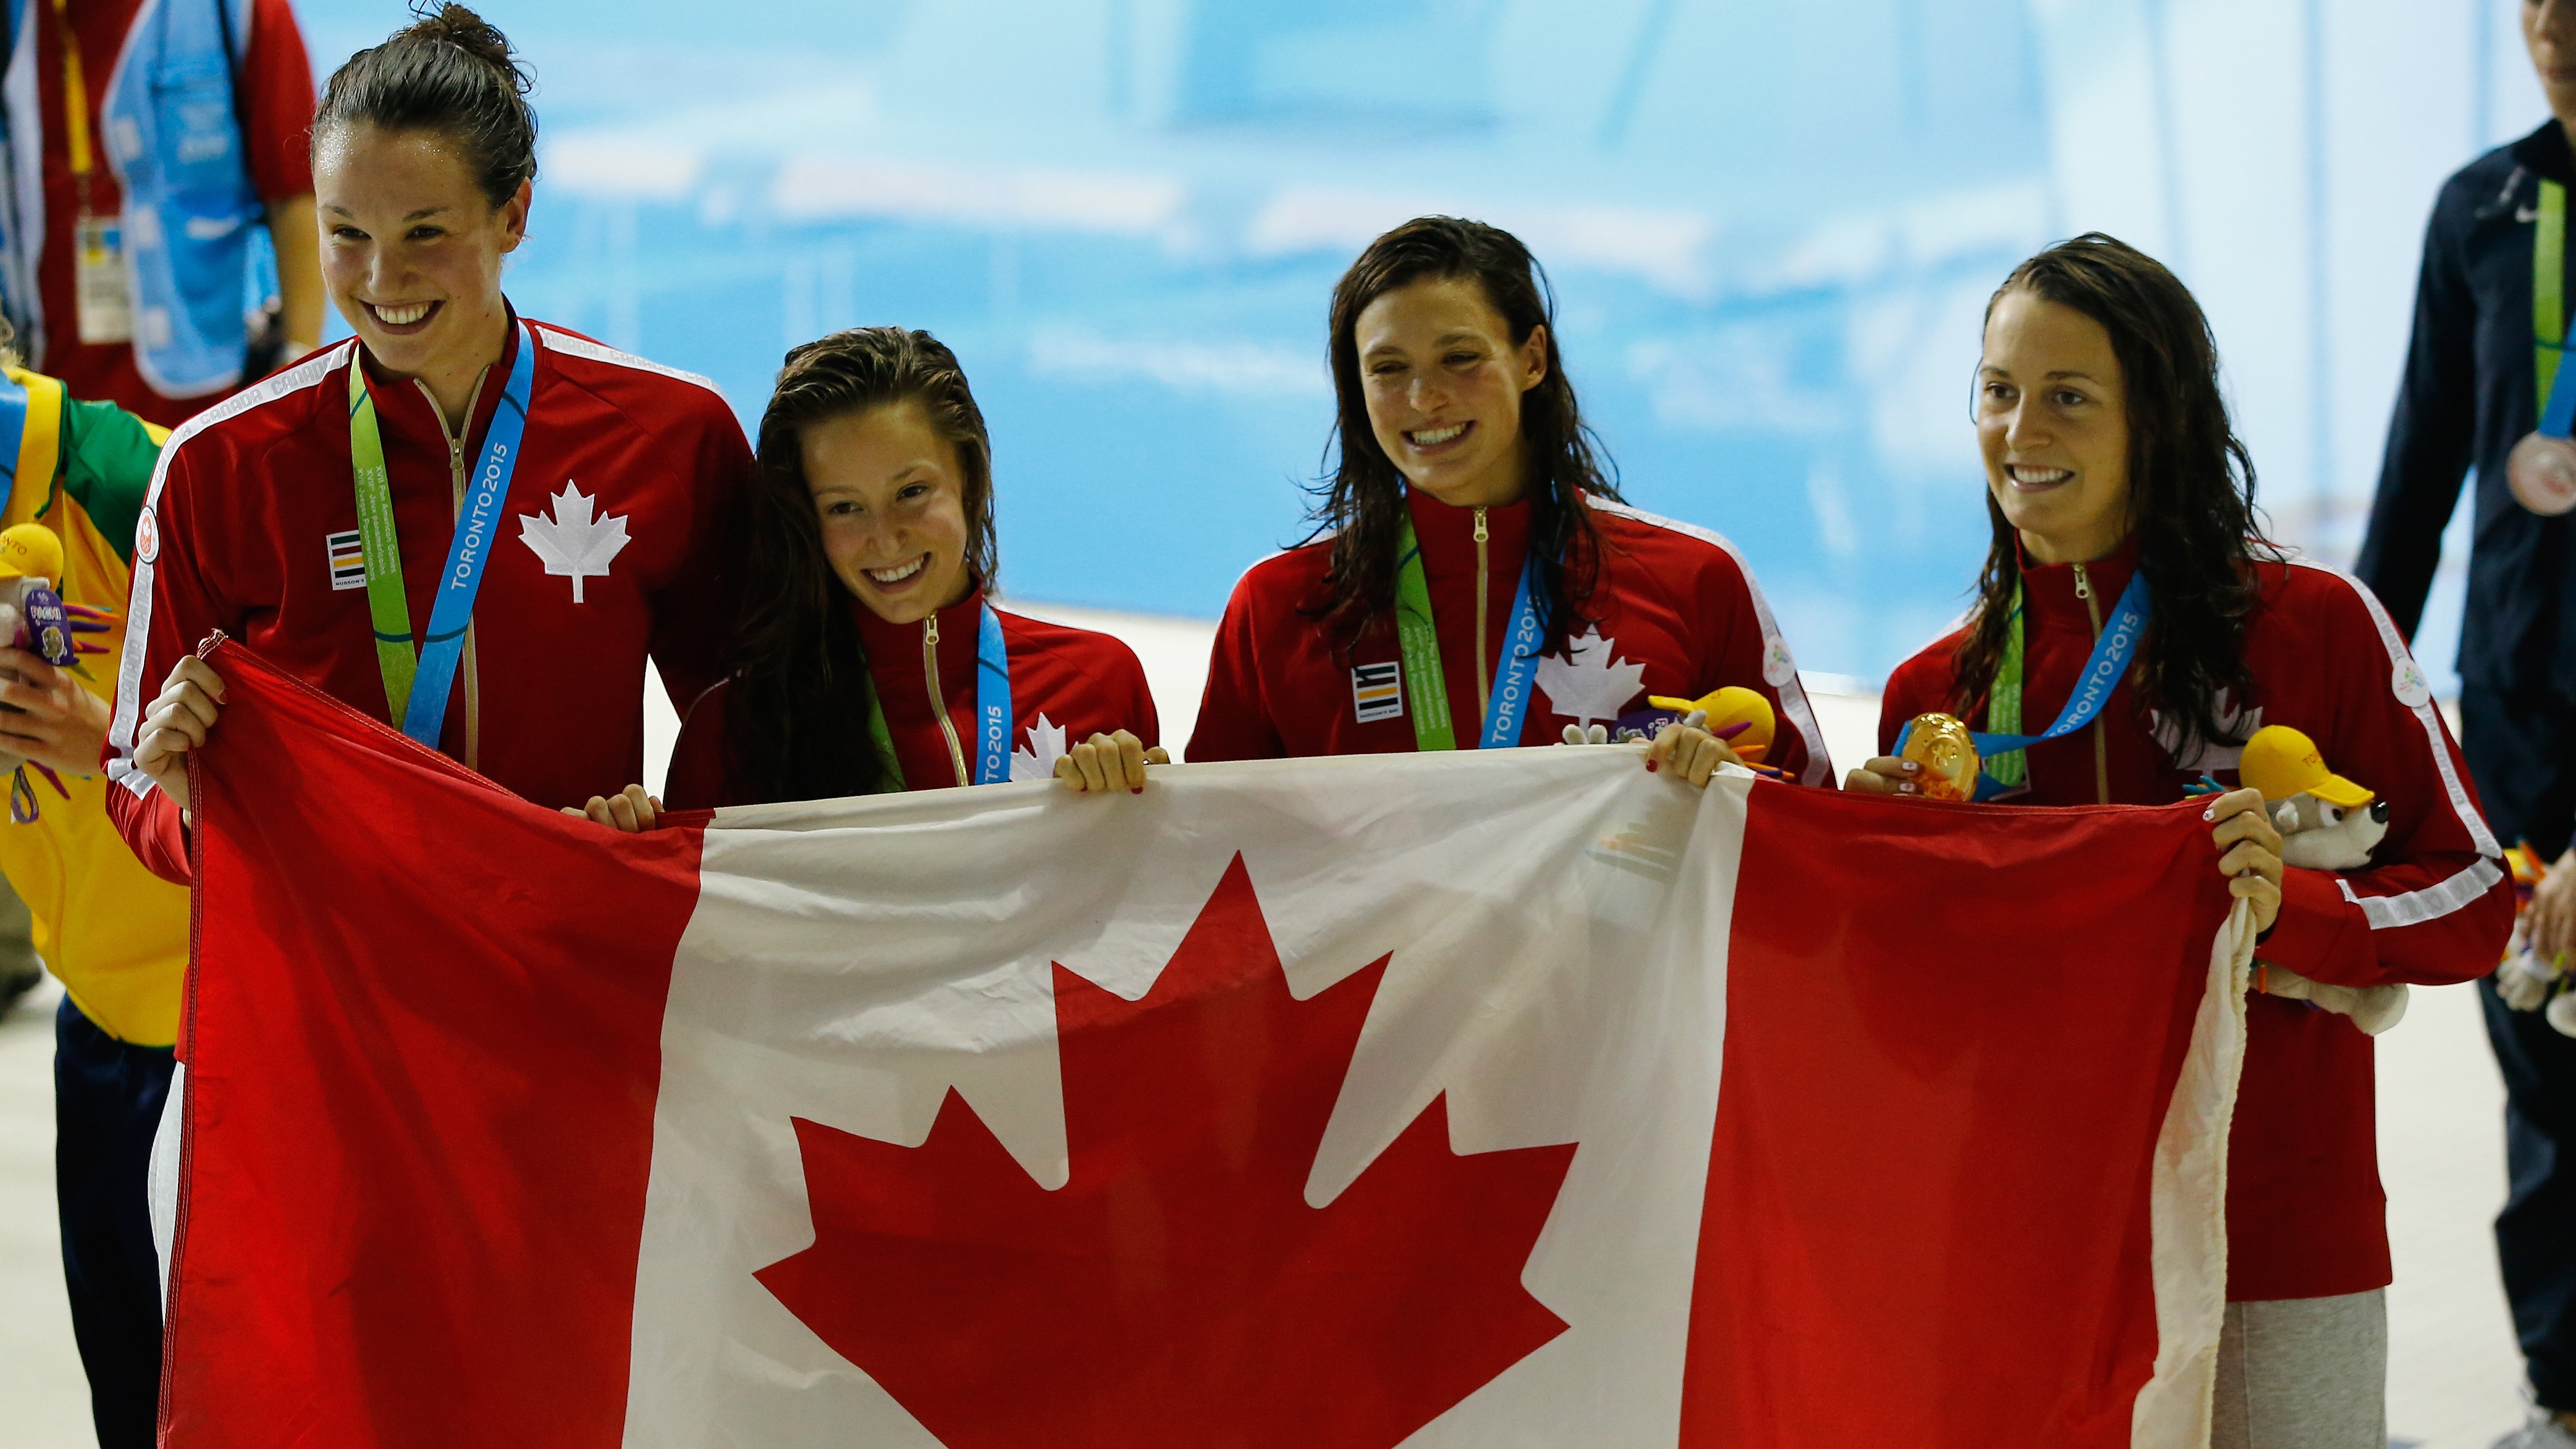 How to Watch July 15 Pan Am Games Live Stream Online